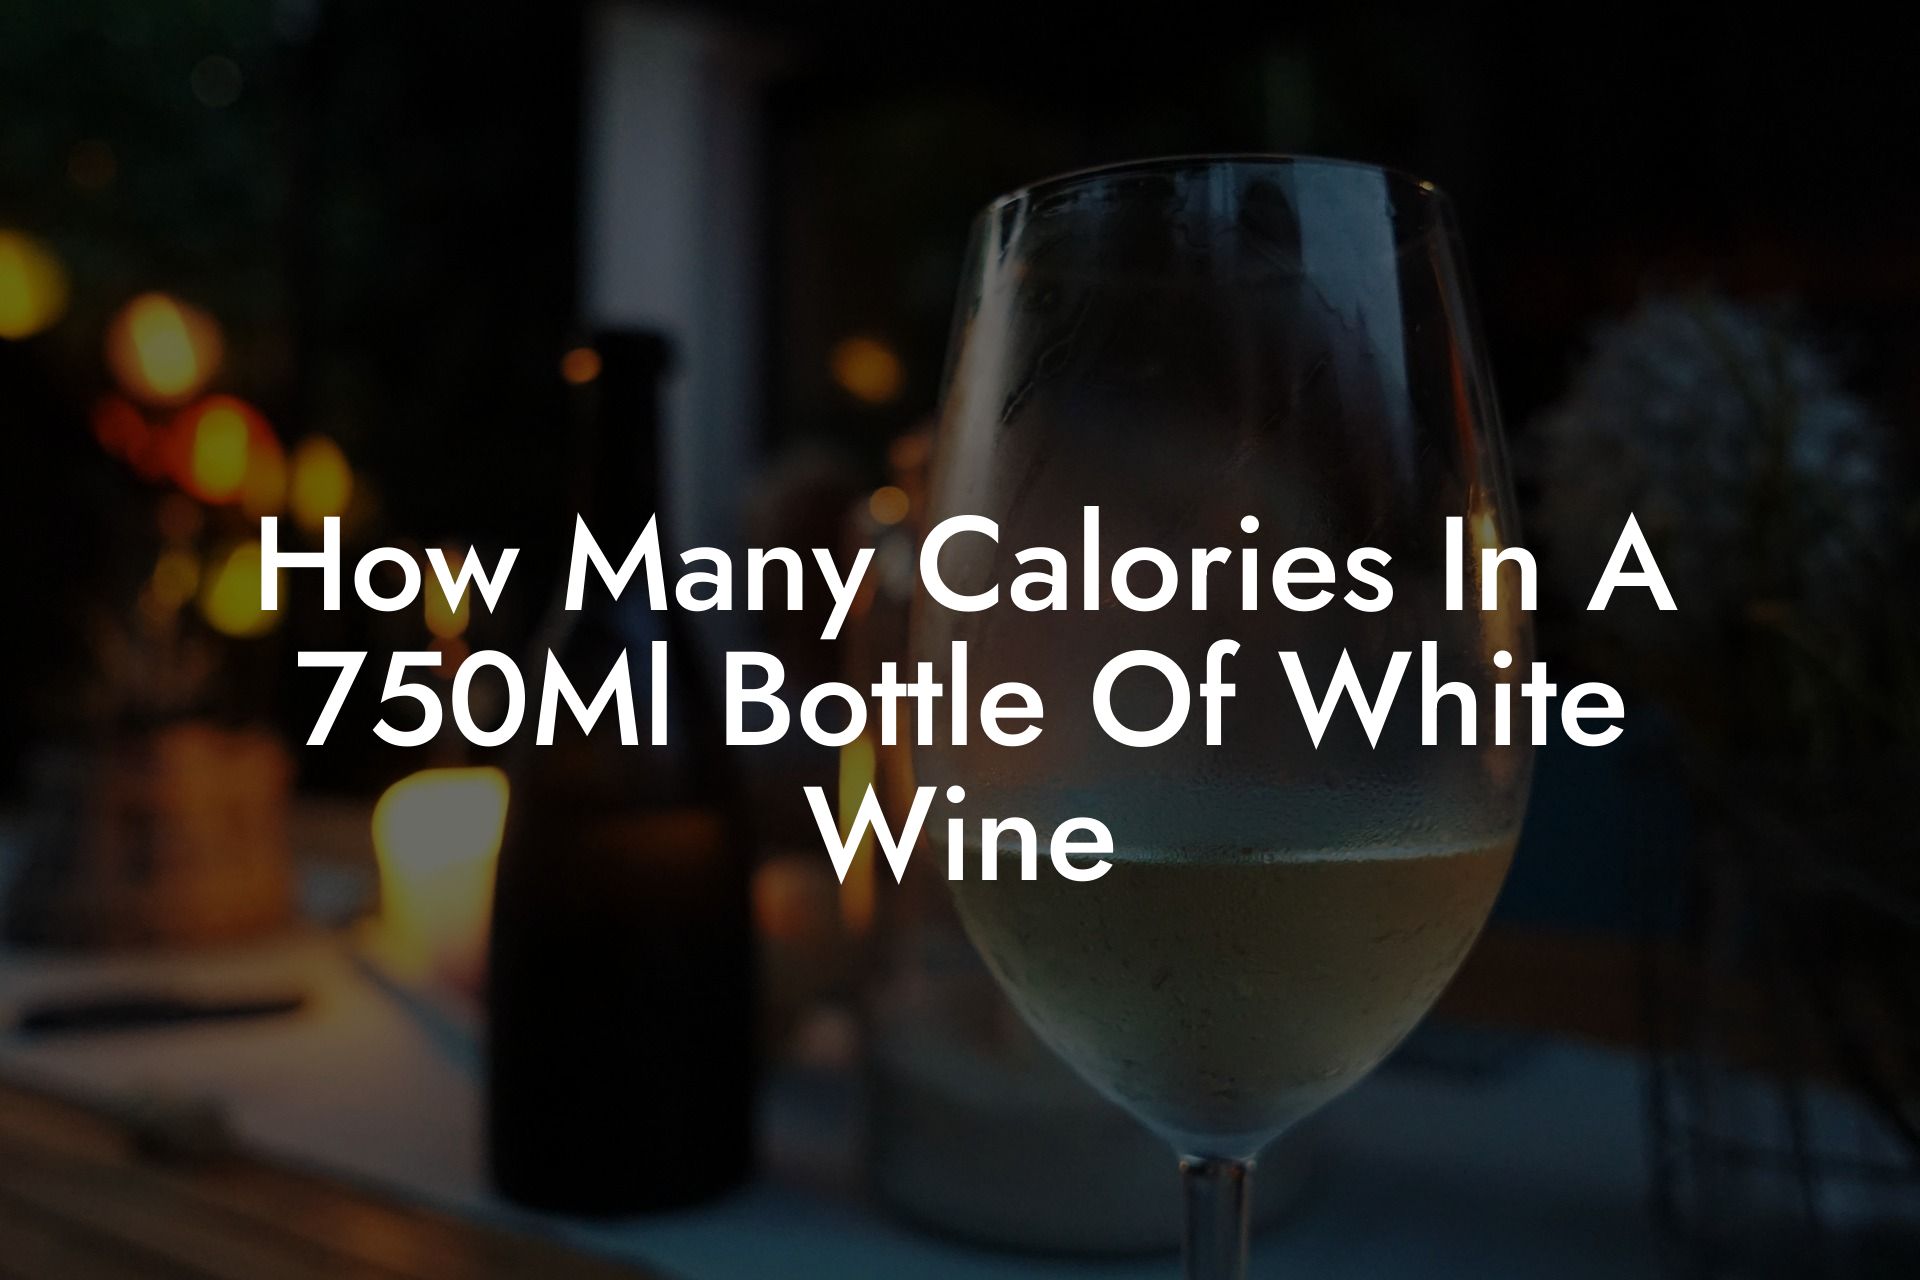 How Many Calories In A 750Ml Bottle Of White Wine